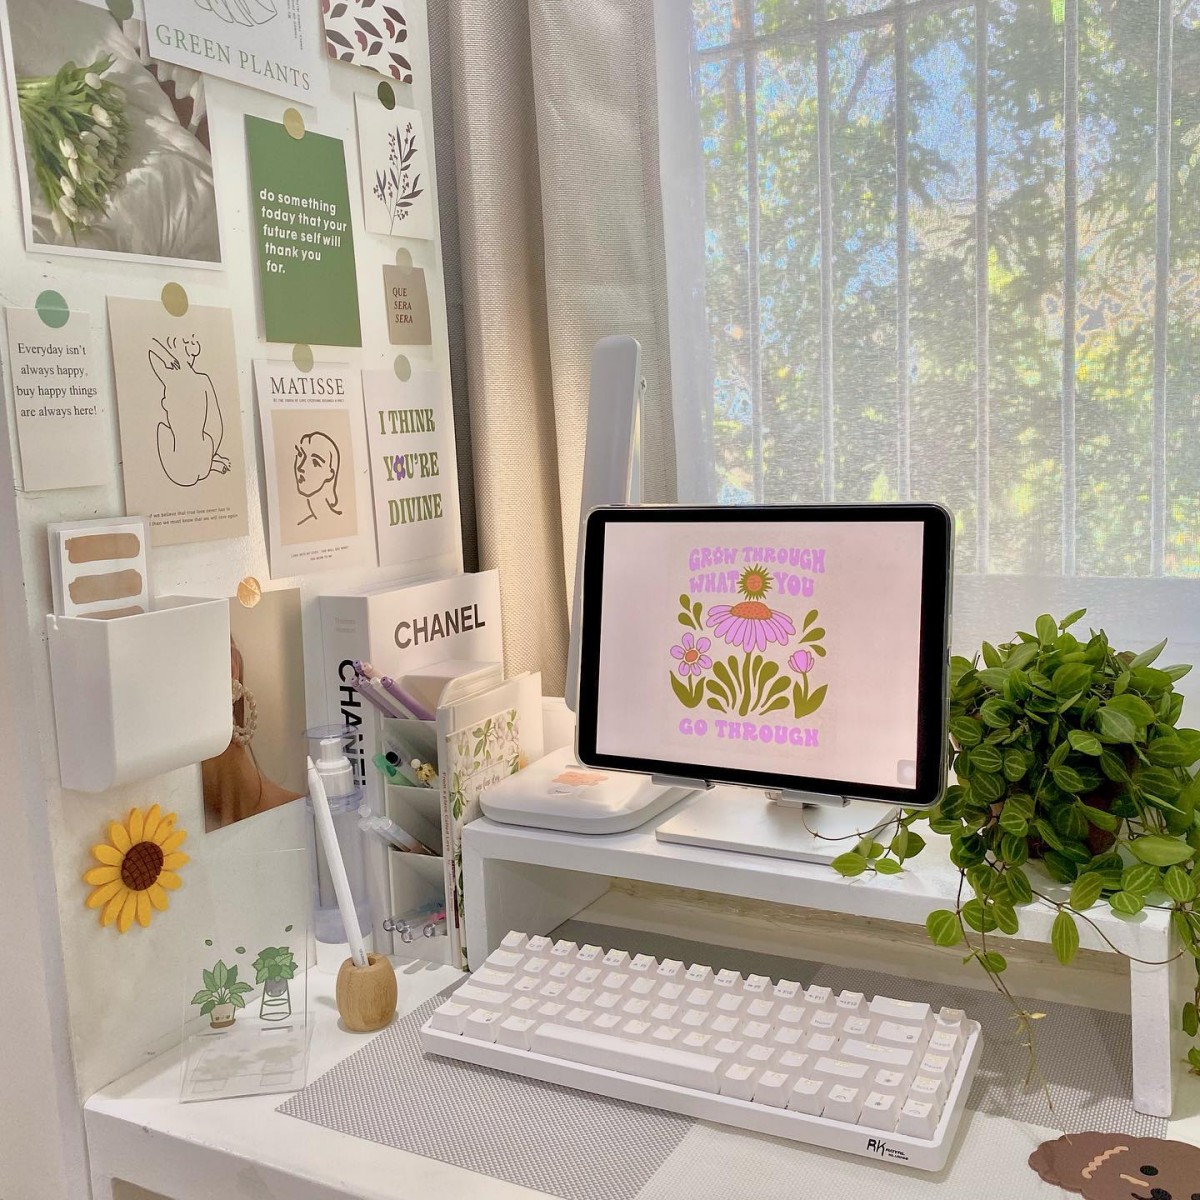 15 Aesthetic Desk Setup Ideas for a Chic Home Office